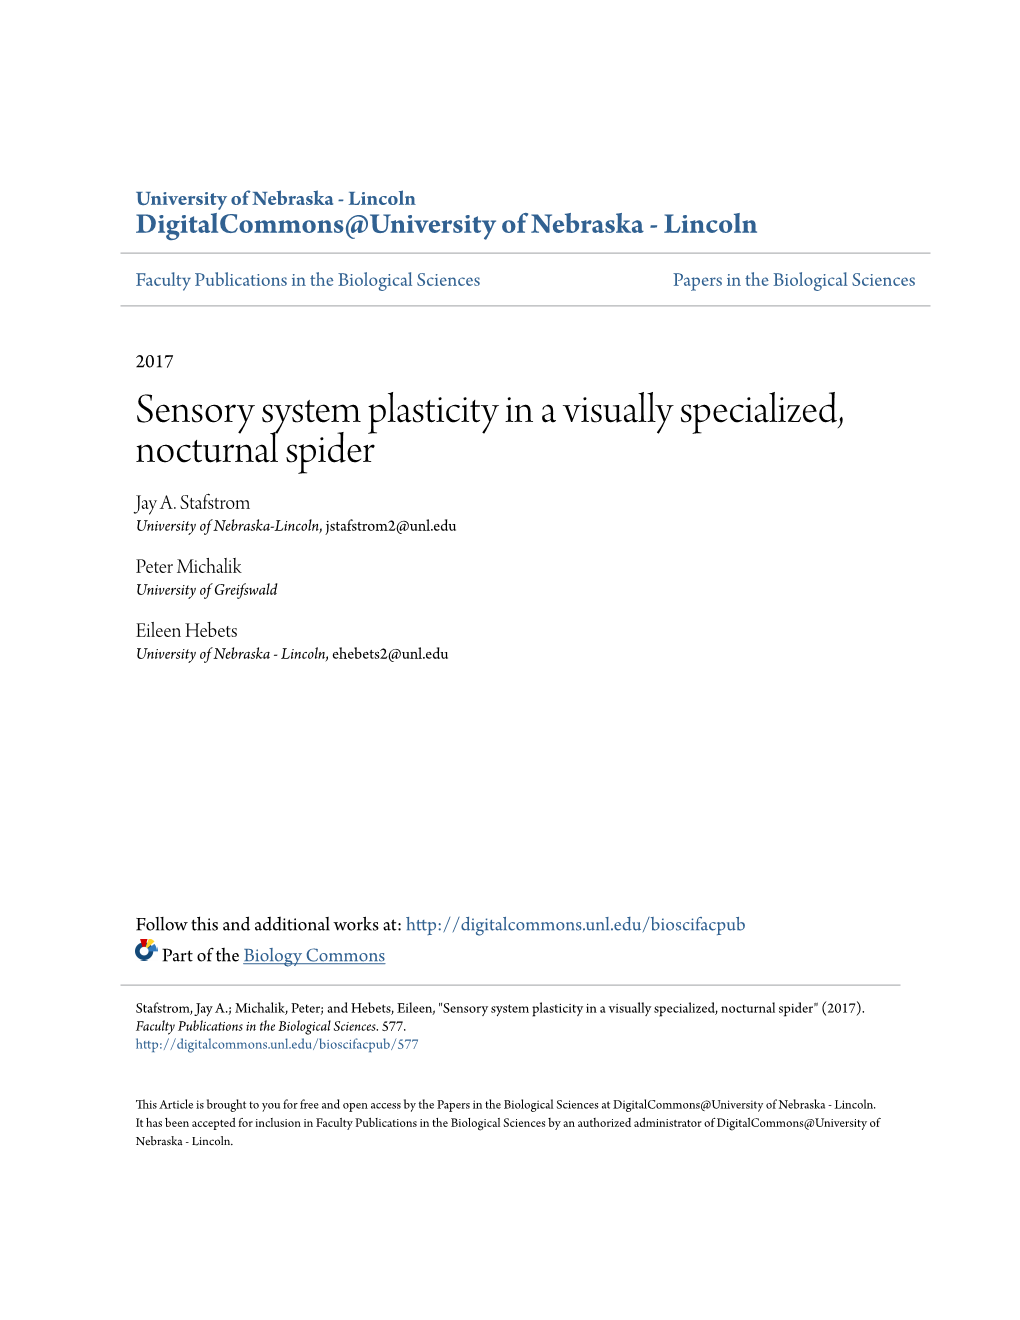 Sensory System Plasticity in a Visually Specialized, Nocturnal Spider Jay A